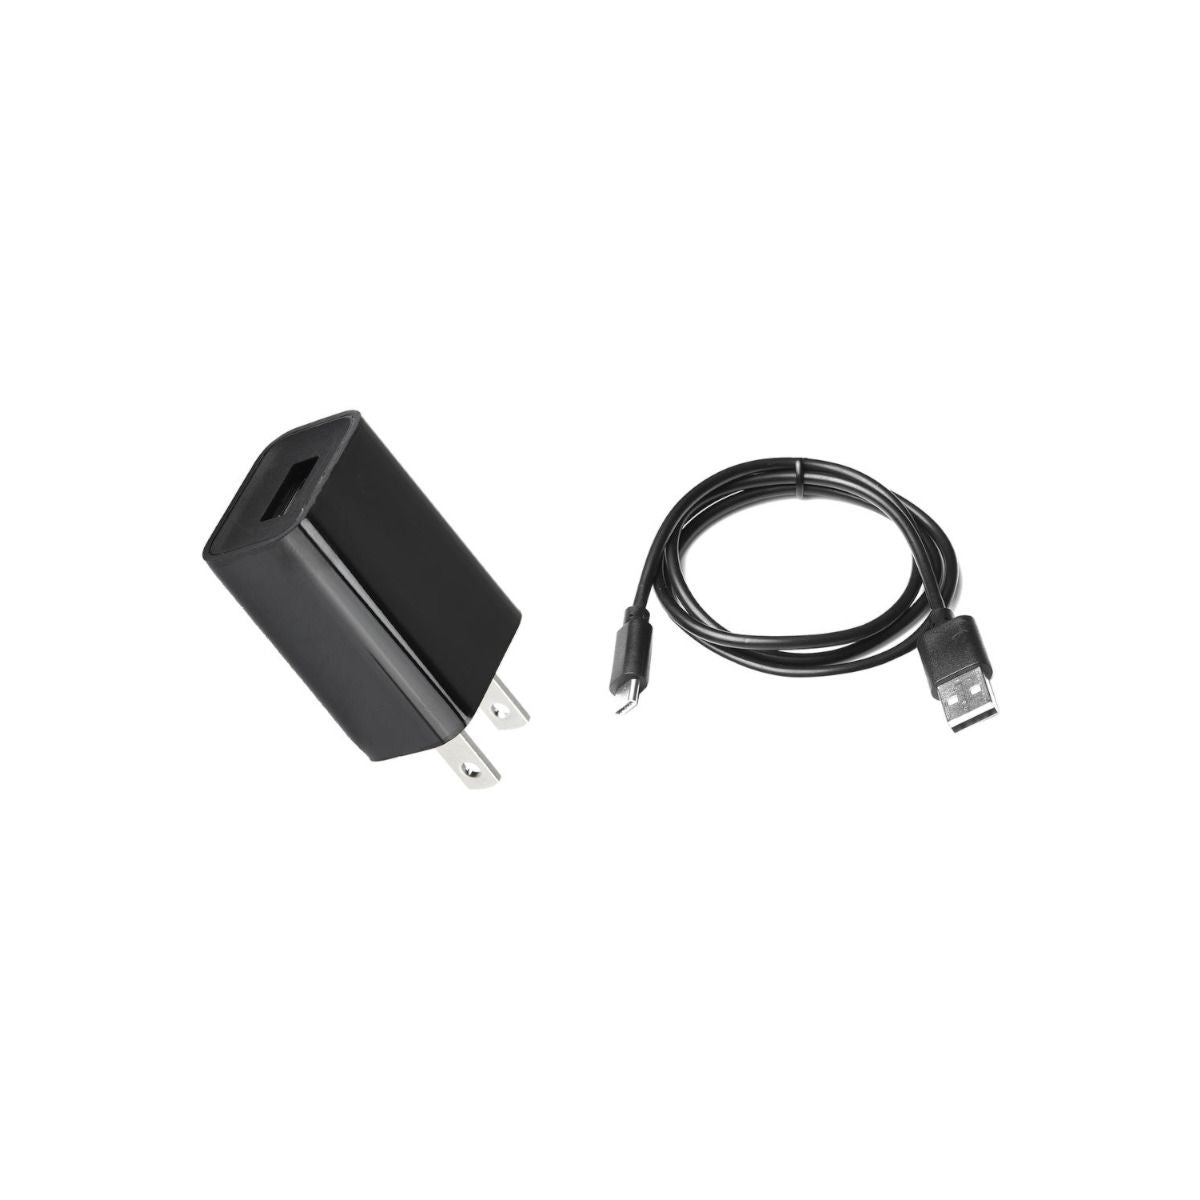 Godox VC1 USB Cable with Charging Adapter